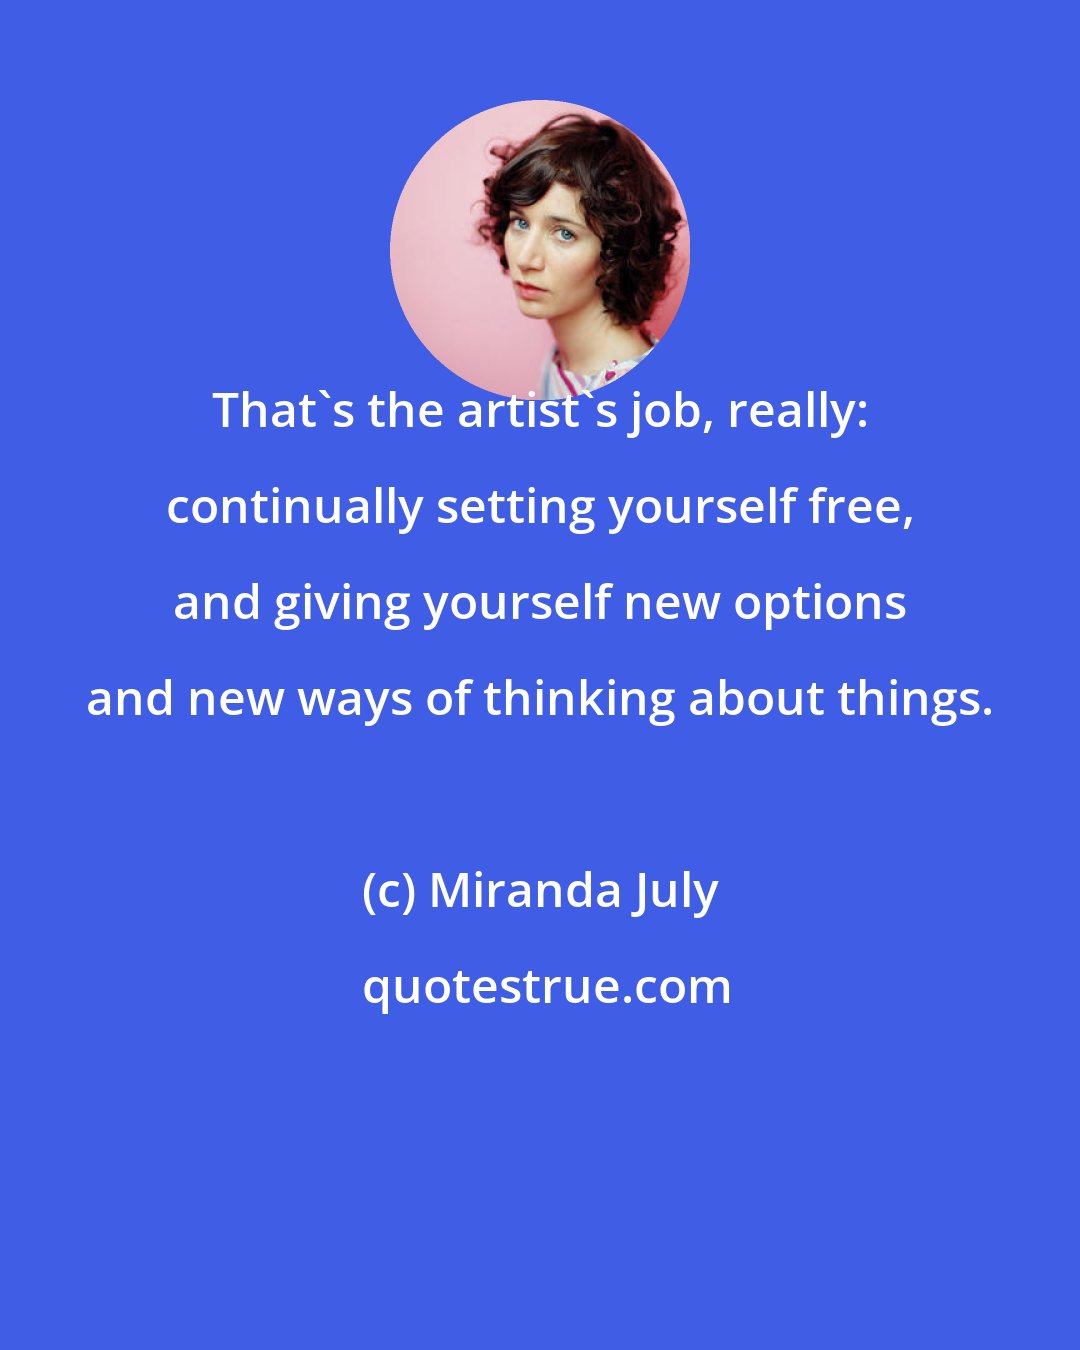 Miranda July: That's the artist's job, really: continually setting yourself free, and giving yourself new options and new ways of thinking about things.